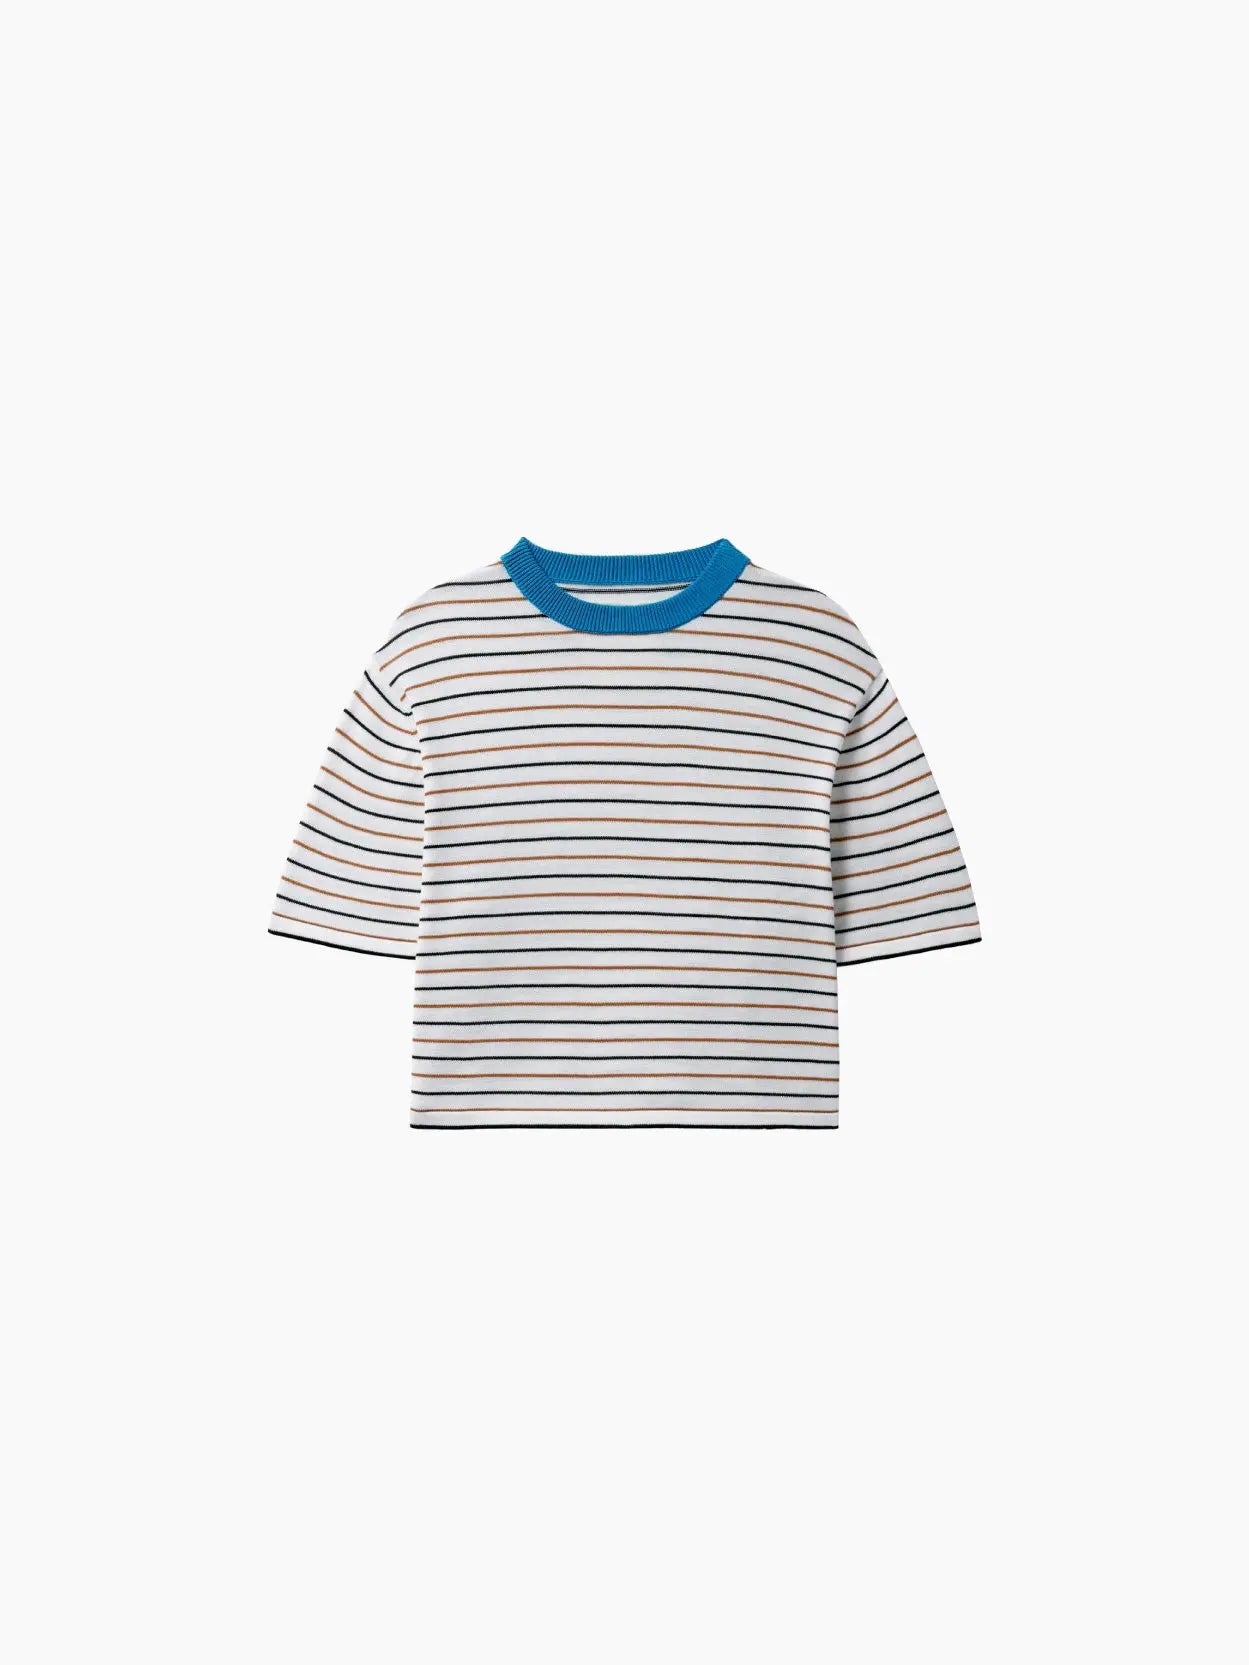 A short-sleeve, striped t-shirt for children available at Bassalstore. The Cotton Striped T-Shirt Ceruleo by Cordera has thin horizontal stripes in blue, white, and red, featuring a round neckline with a solid blue collar. The background is white. Perfect for adding a touch of Barcelona flair to any child's wardrobe.